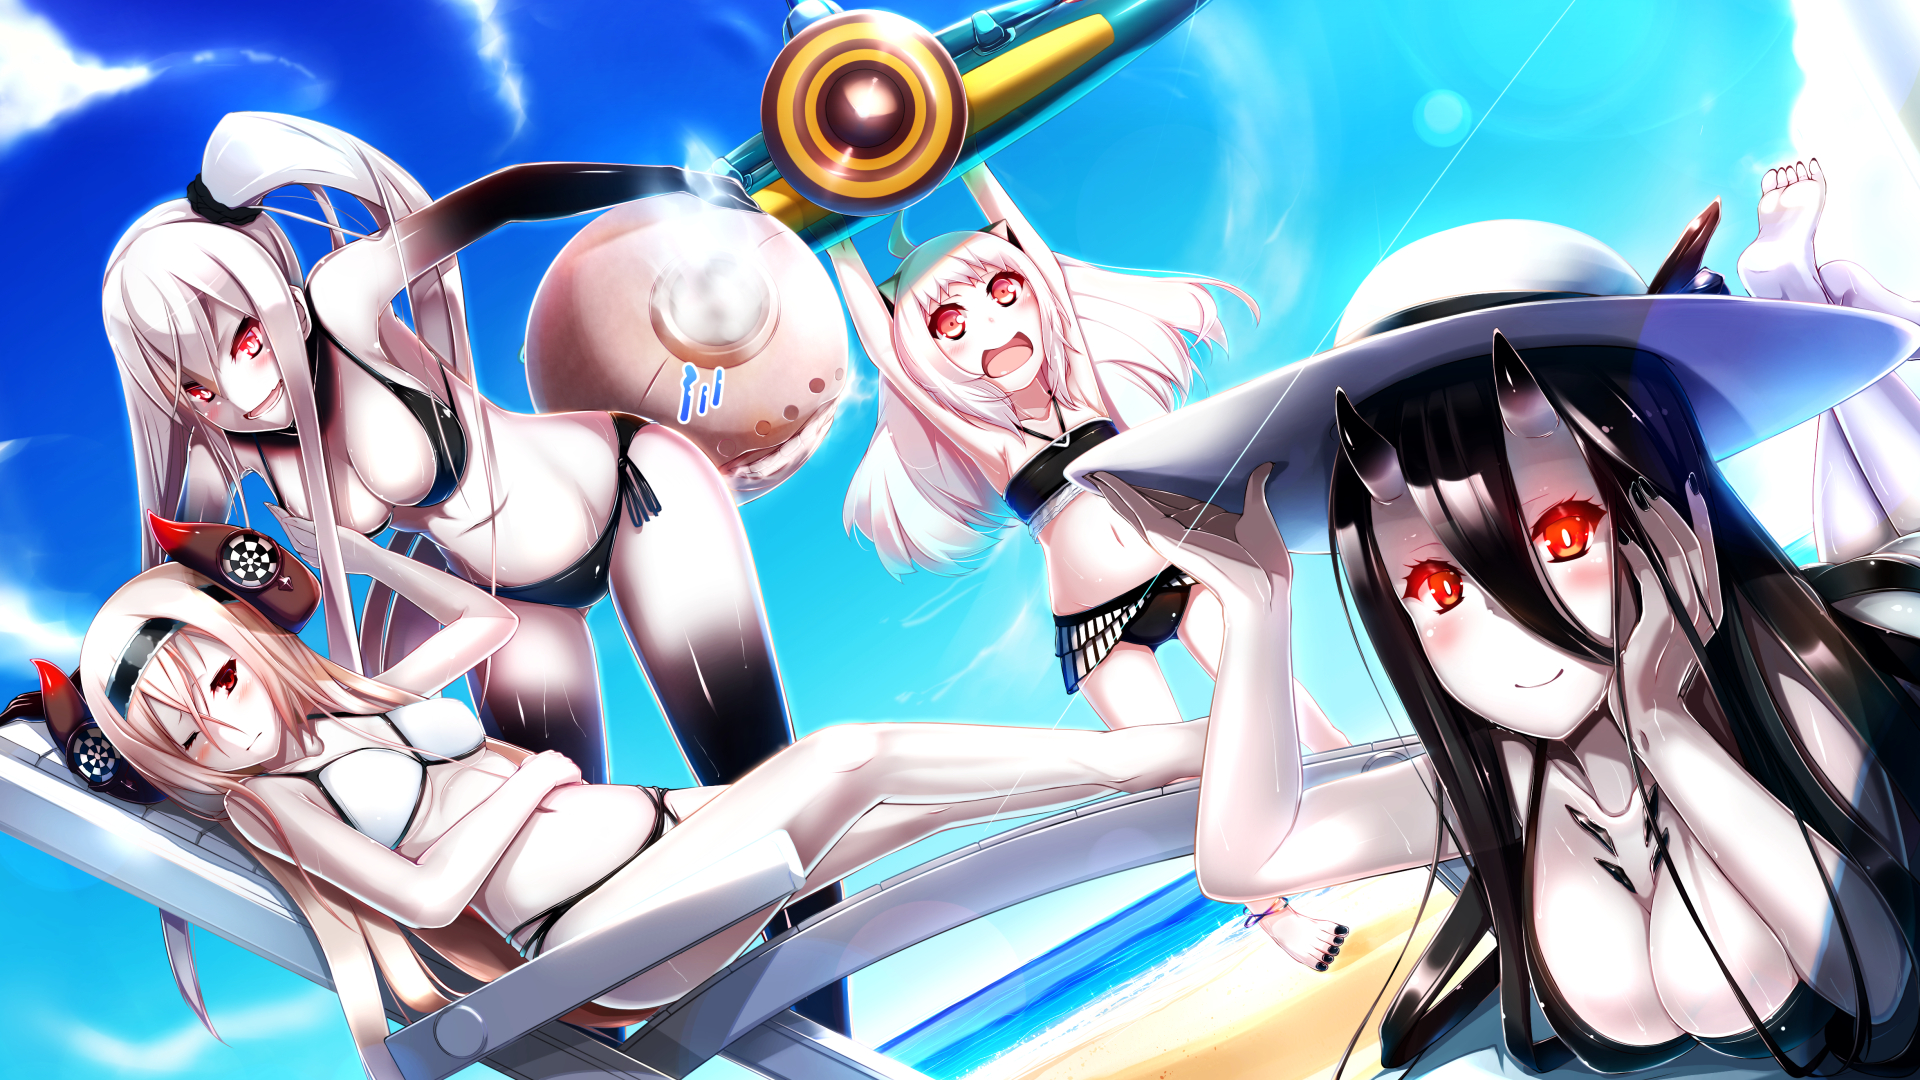 Battleship Symbiotic Hime Midway Hime Summer 1920x1080